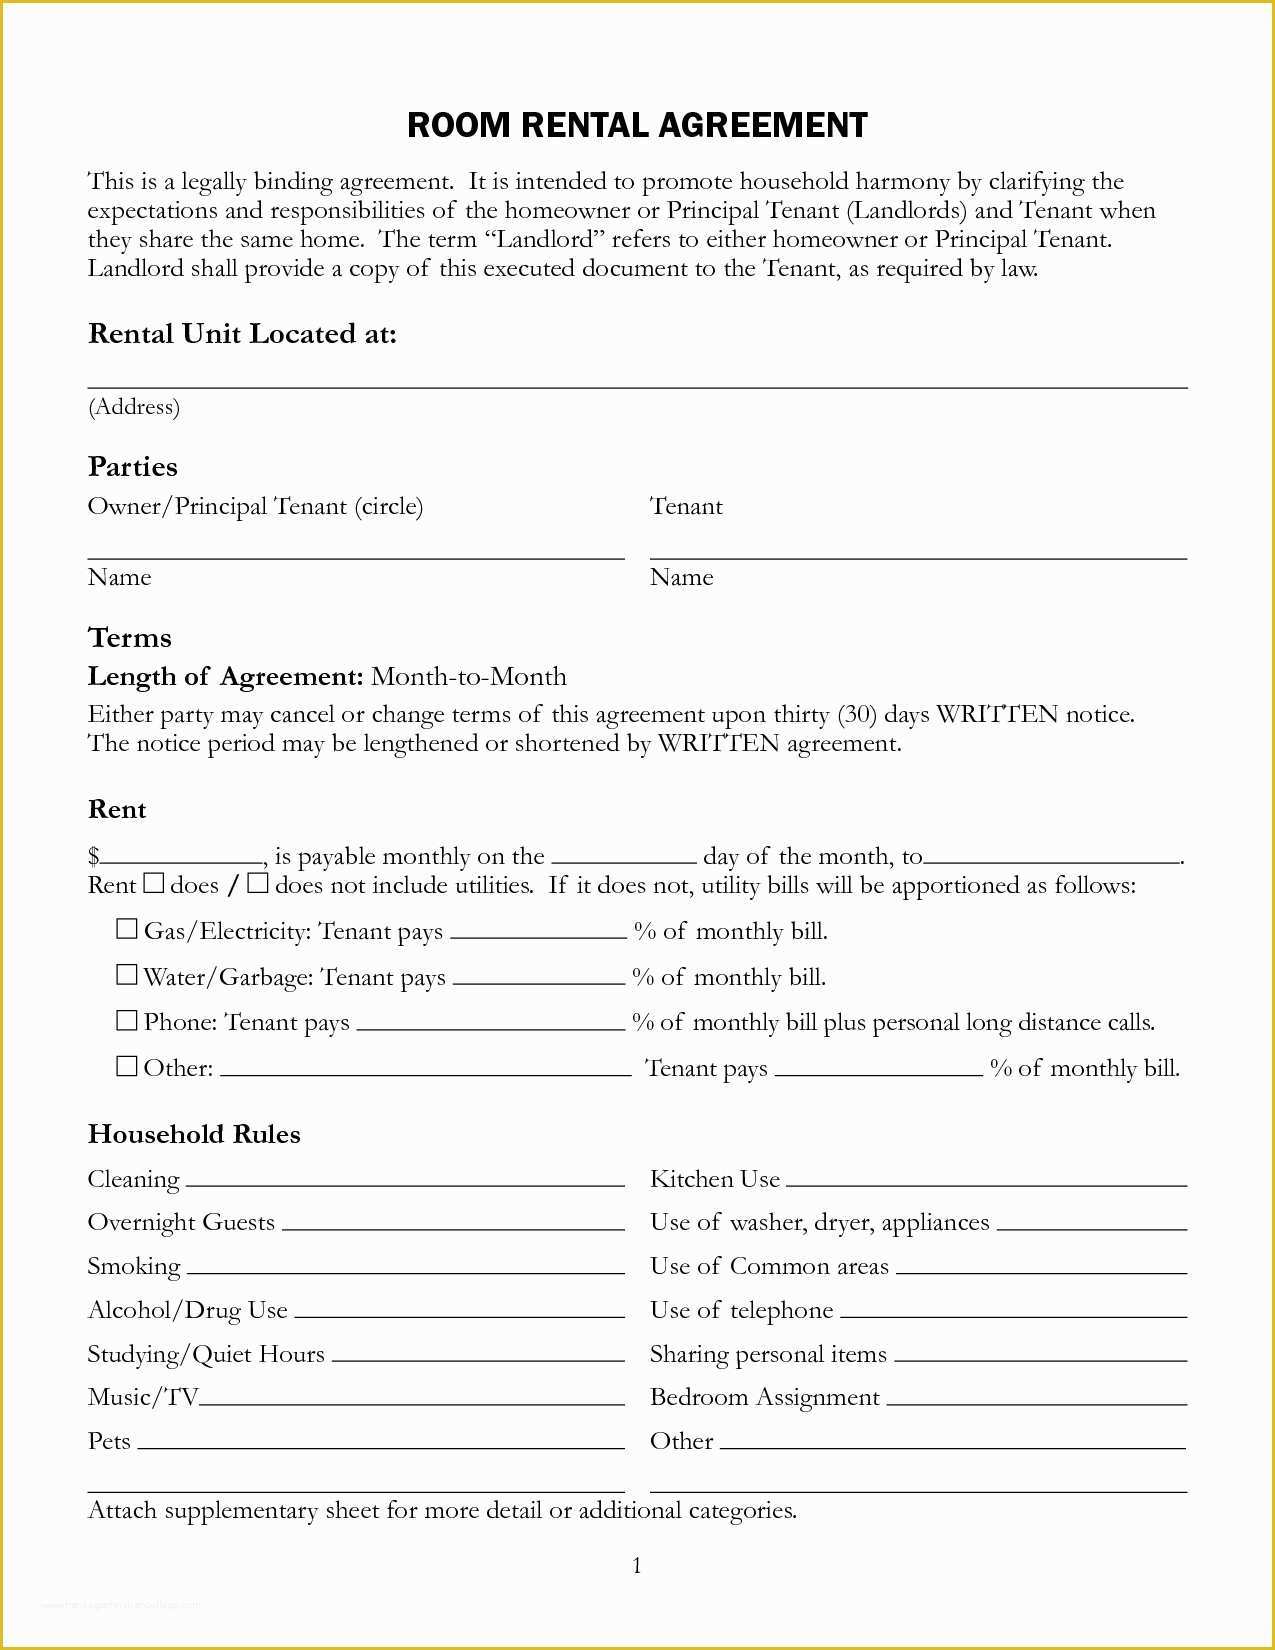 Free Room Rental Agreement Template Word Of Lease Agreement Template